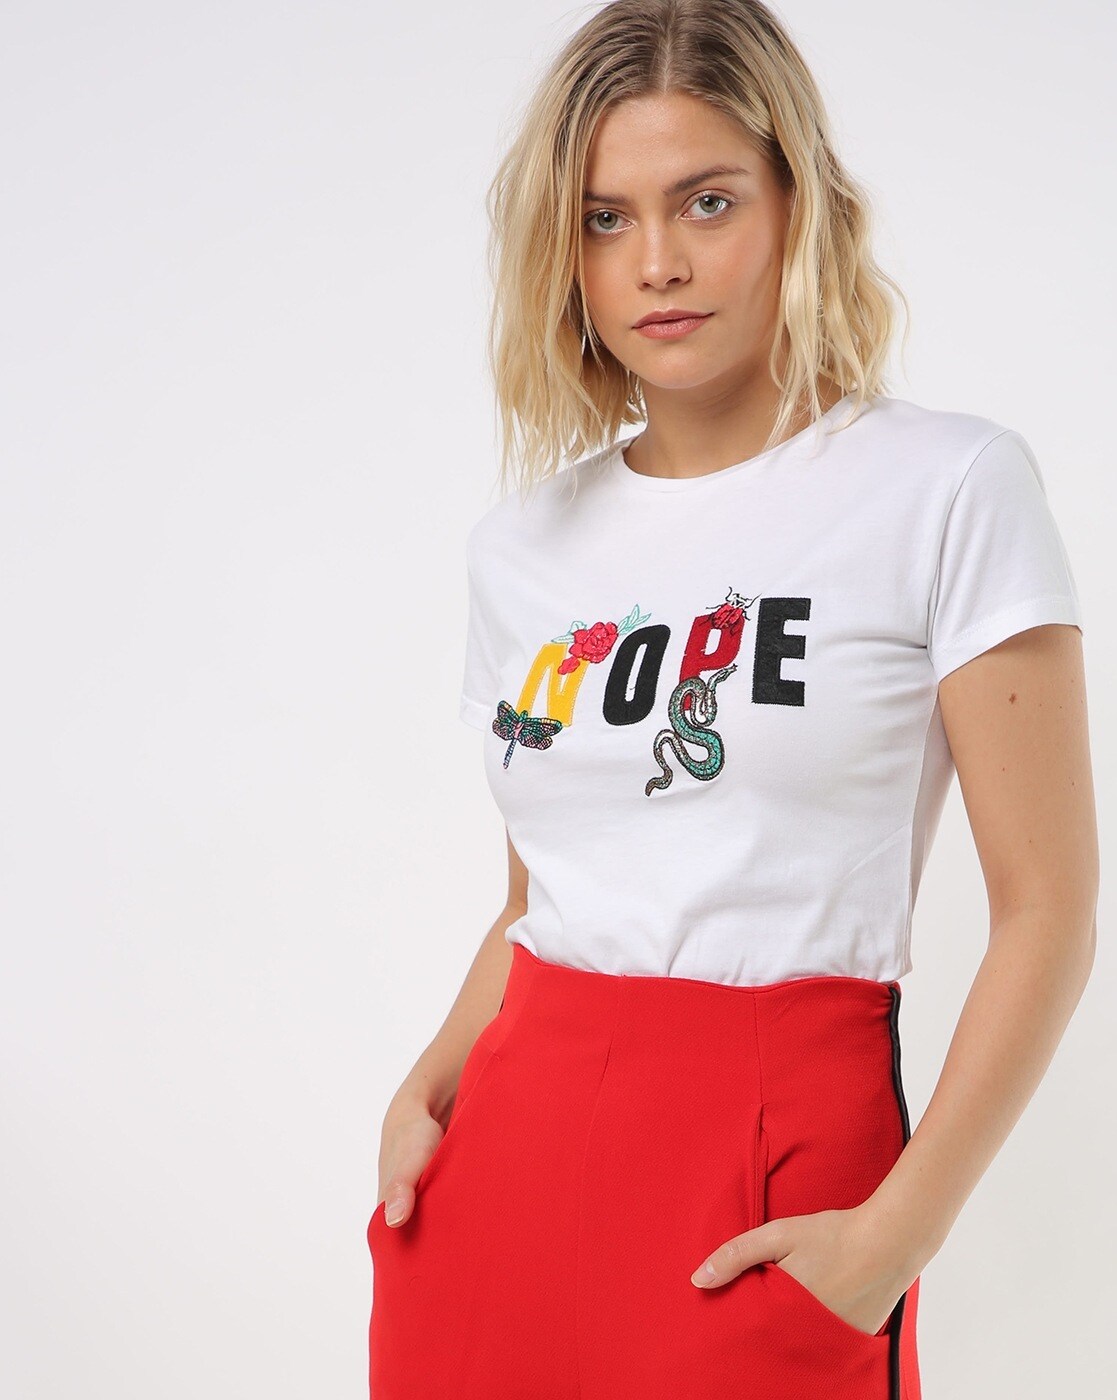 madame t shirts online india